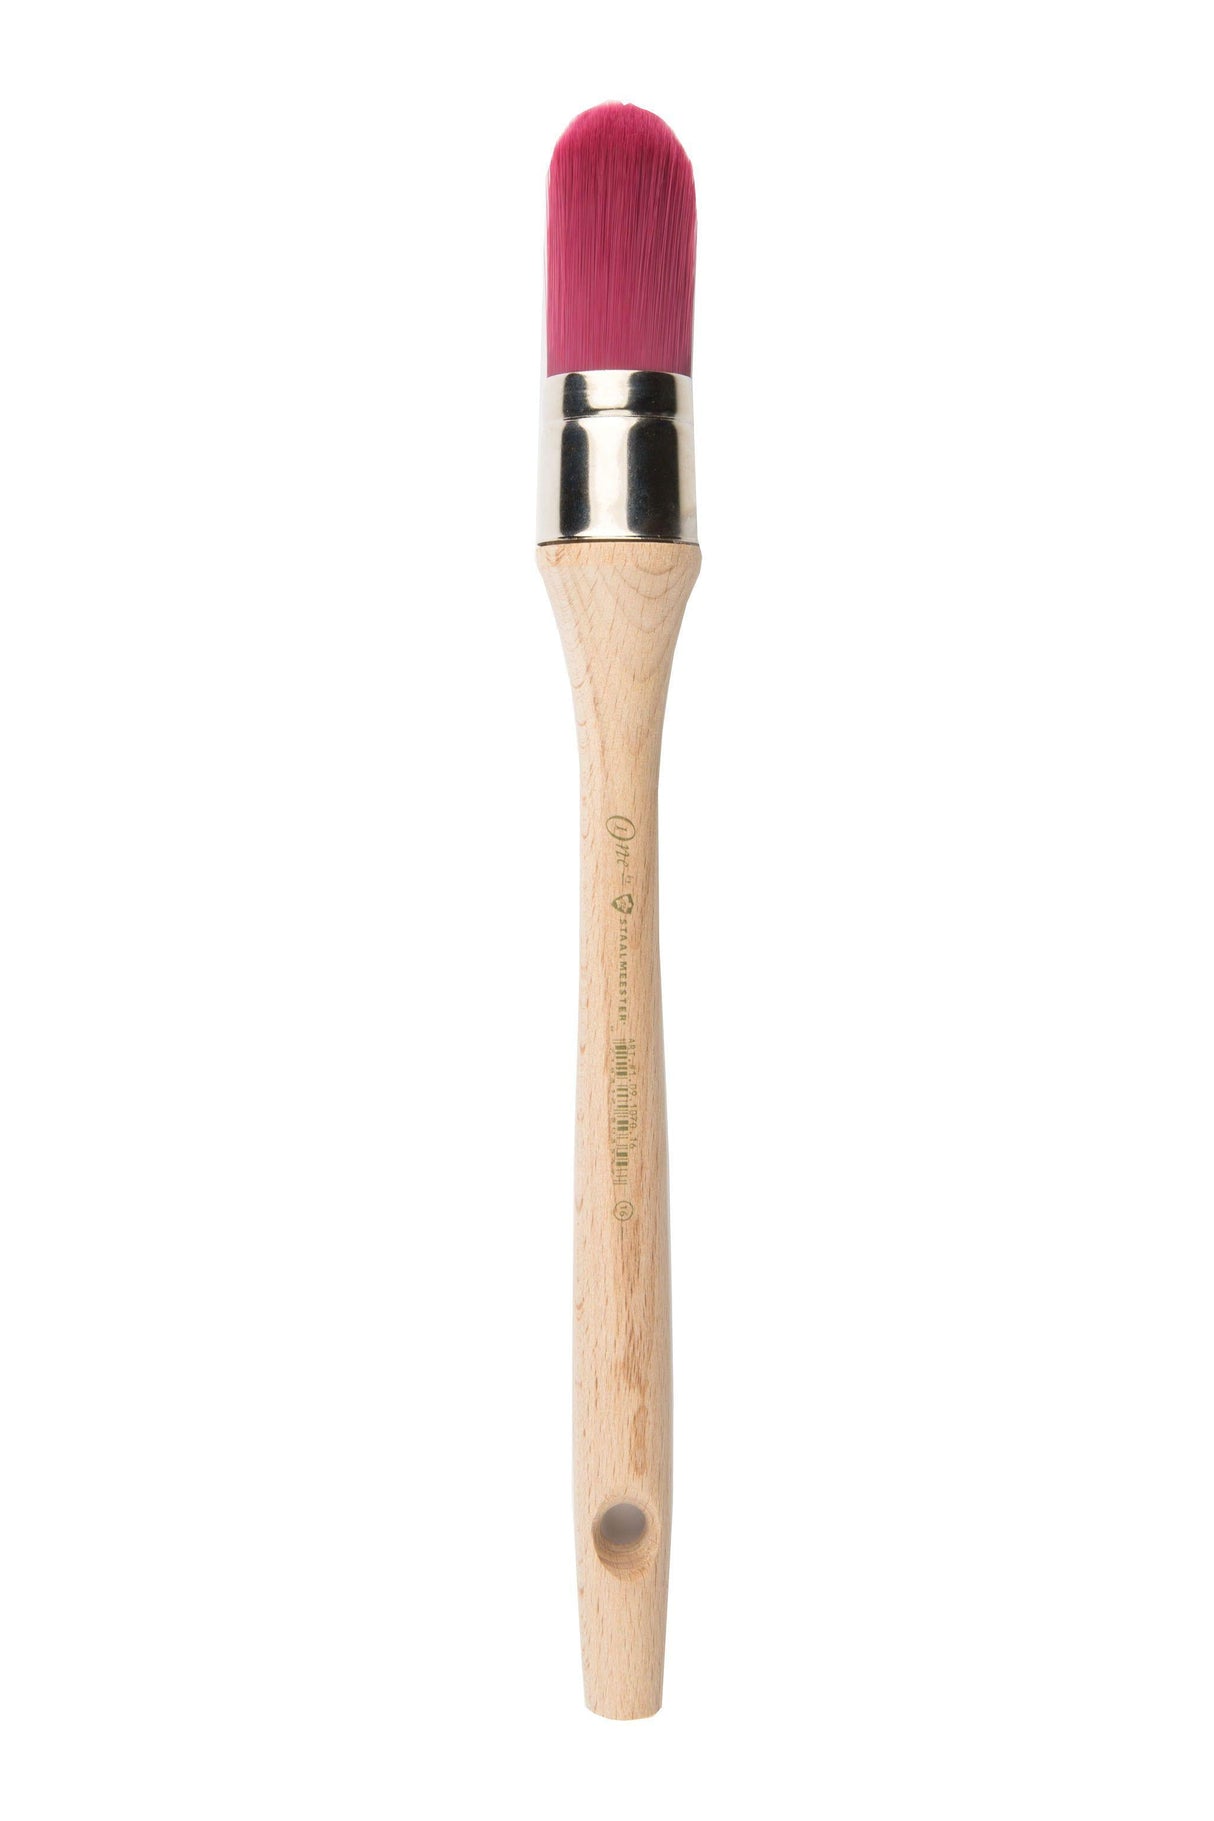 Round Ultimate ONE Synthetic Paintbrush (ONE Series 1070) by Staalmeester @ Painted Heirloom